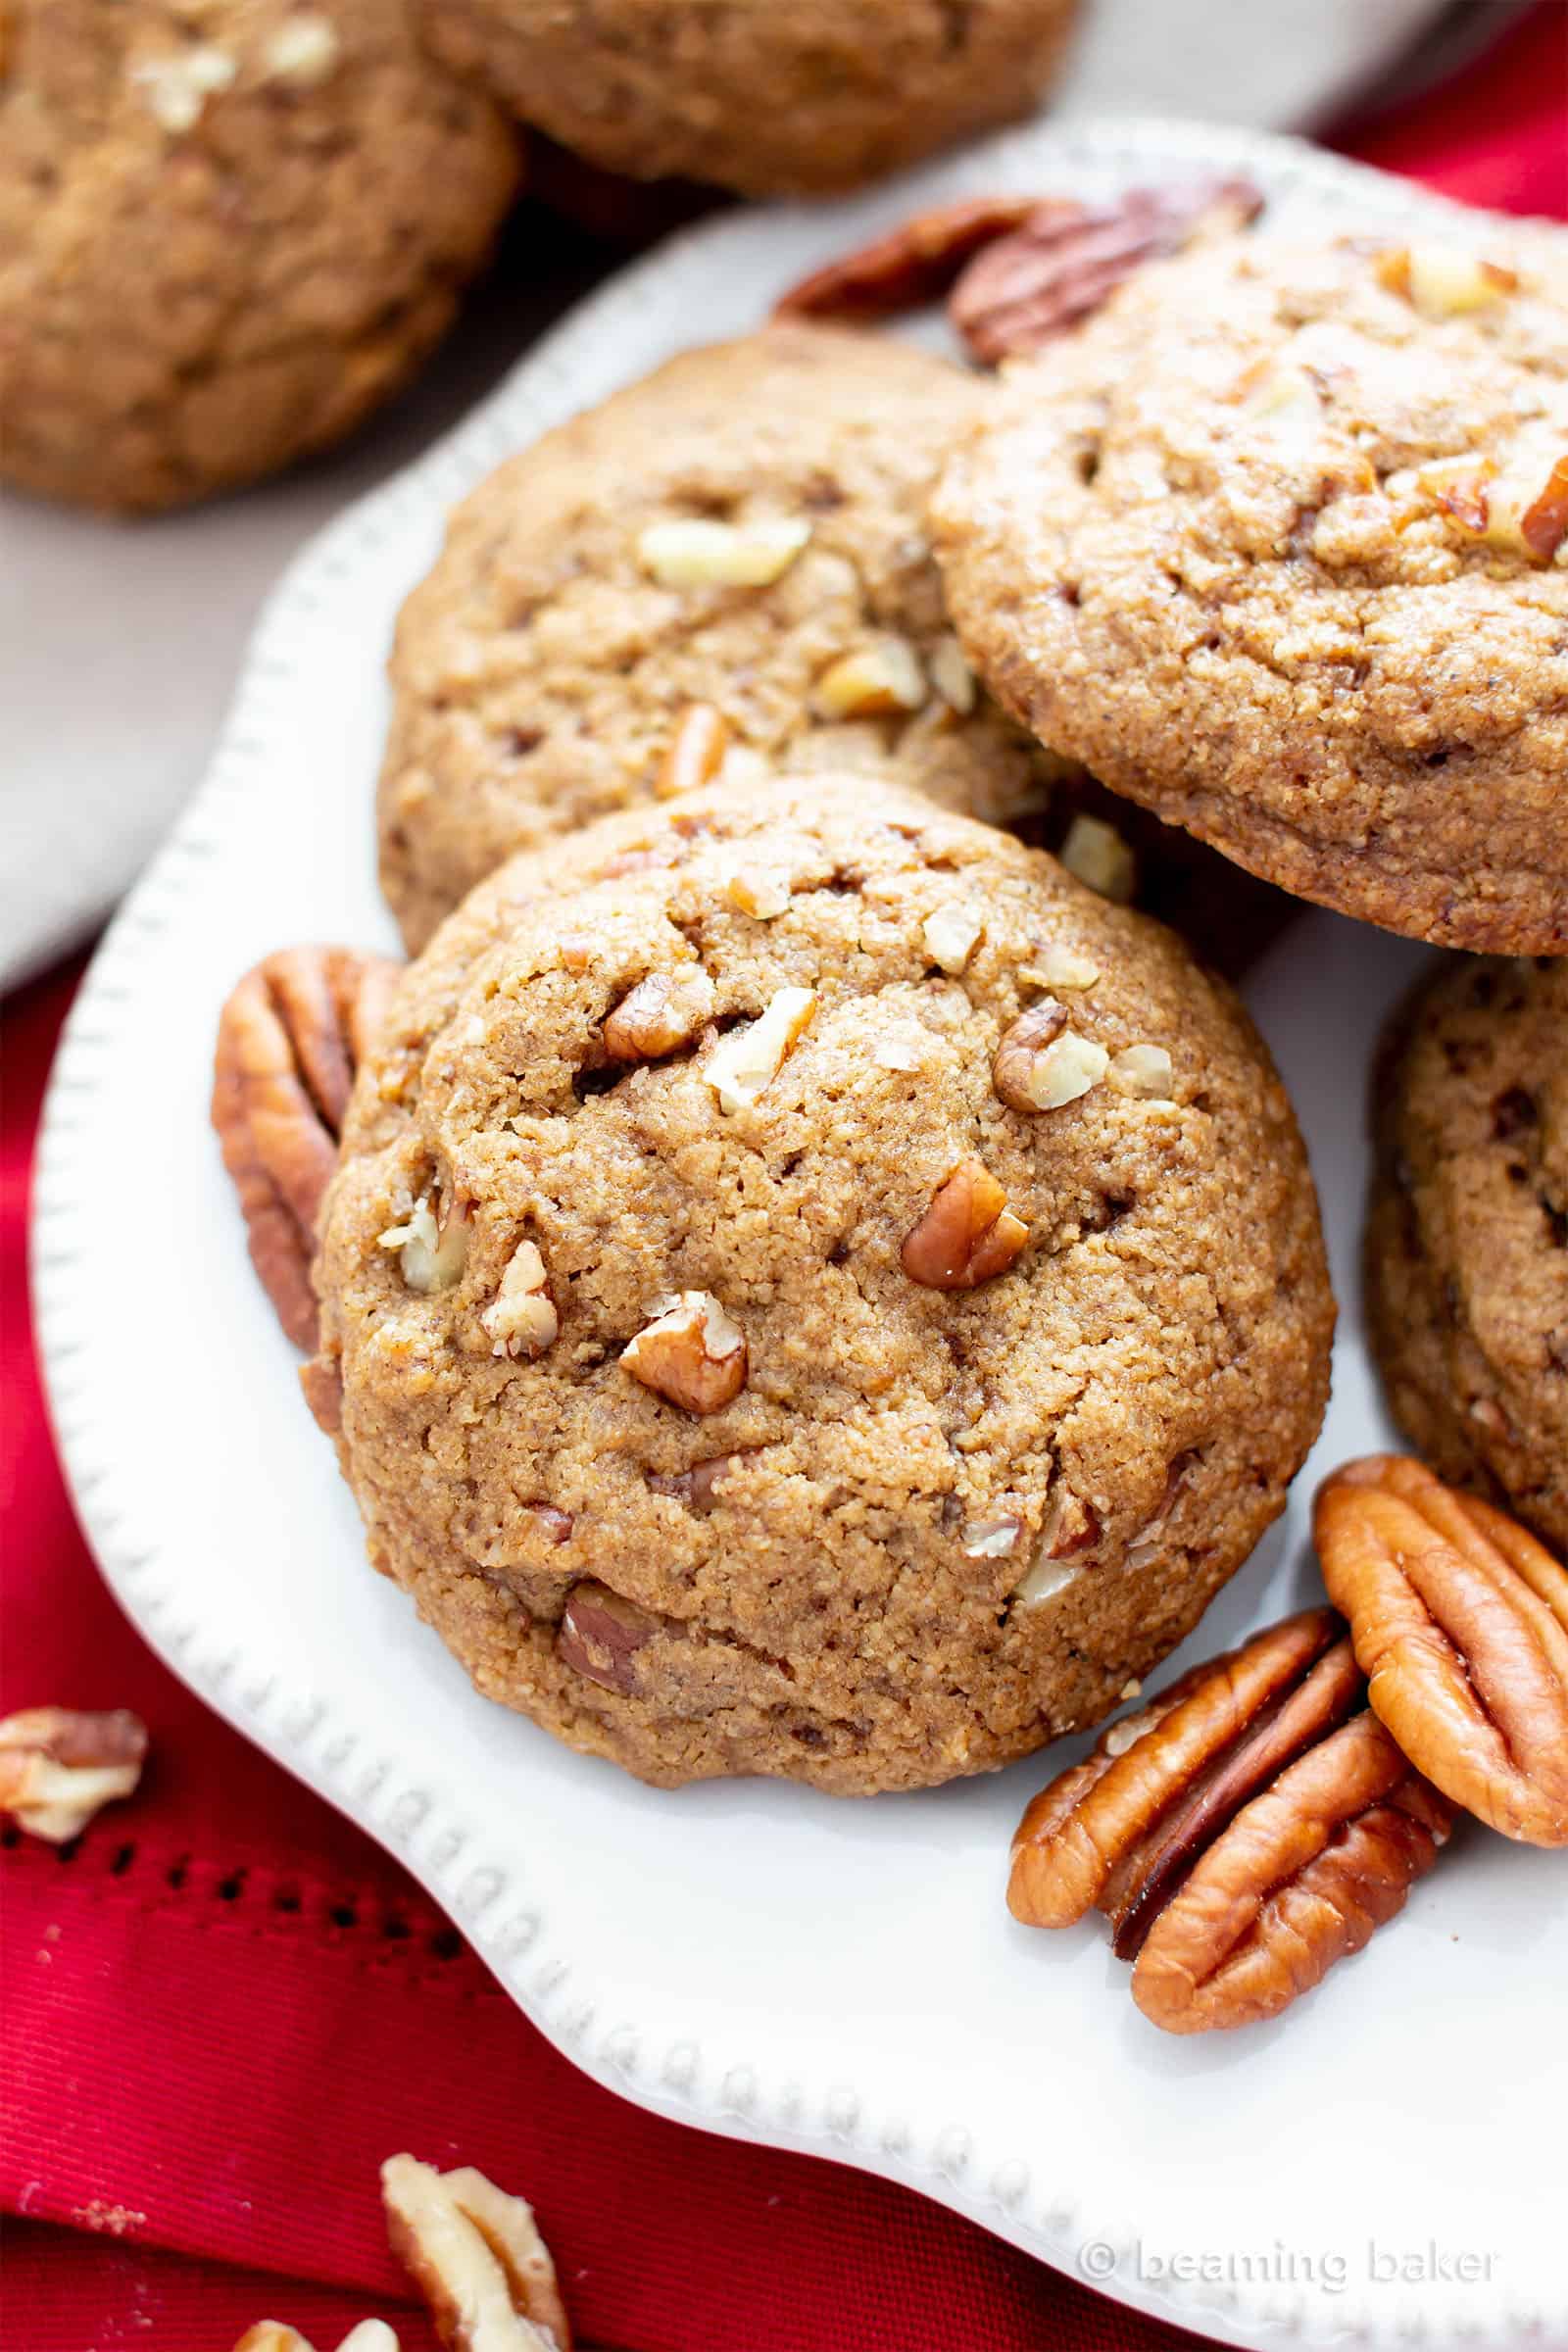 Easy Vegan Cinnamon Pecan Cookies (V, GF): an easy recipe for chewy on the outside, soft on the inside buttery gluten free pecan cookies bursting with pecan crunch and a cinnamon kick! Made with healthy ingredients. #Cookies #BeamingBaker #Vegan #GlutenFree #GlutenFreeCookies #Christmas #HealthyBaking #VeganCookies | Recipe at BeamingBaker.com